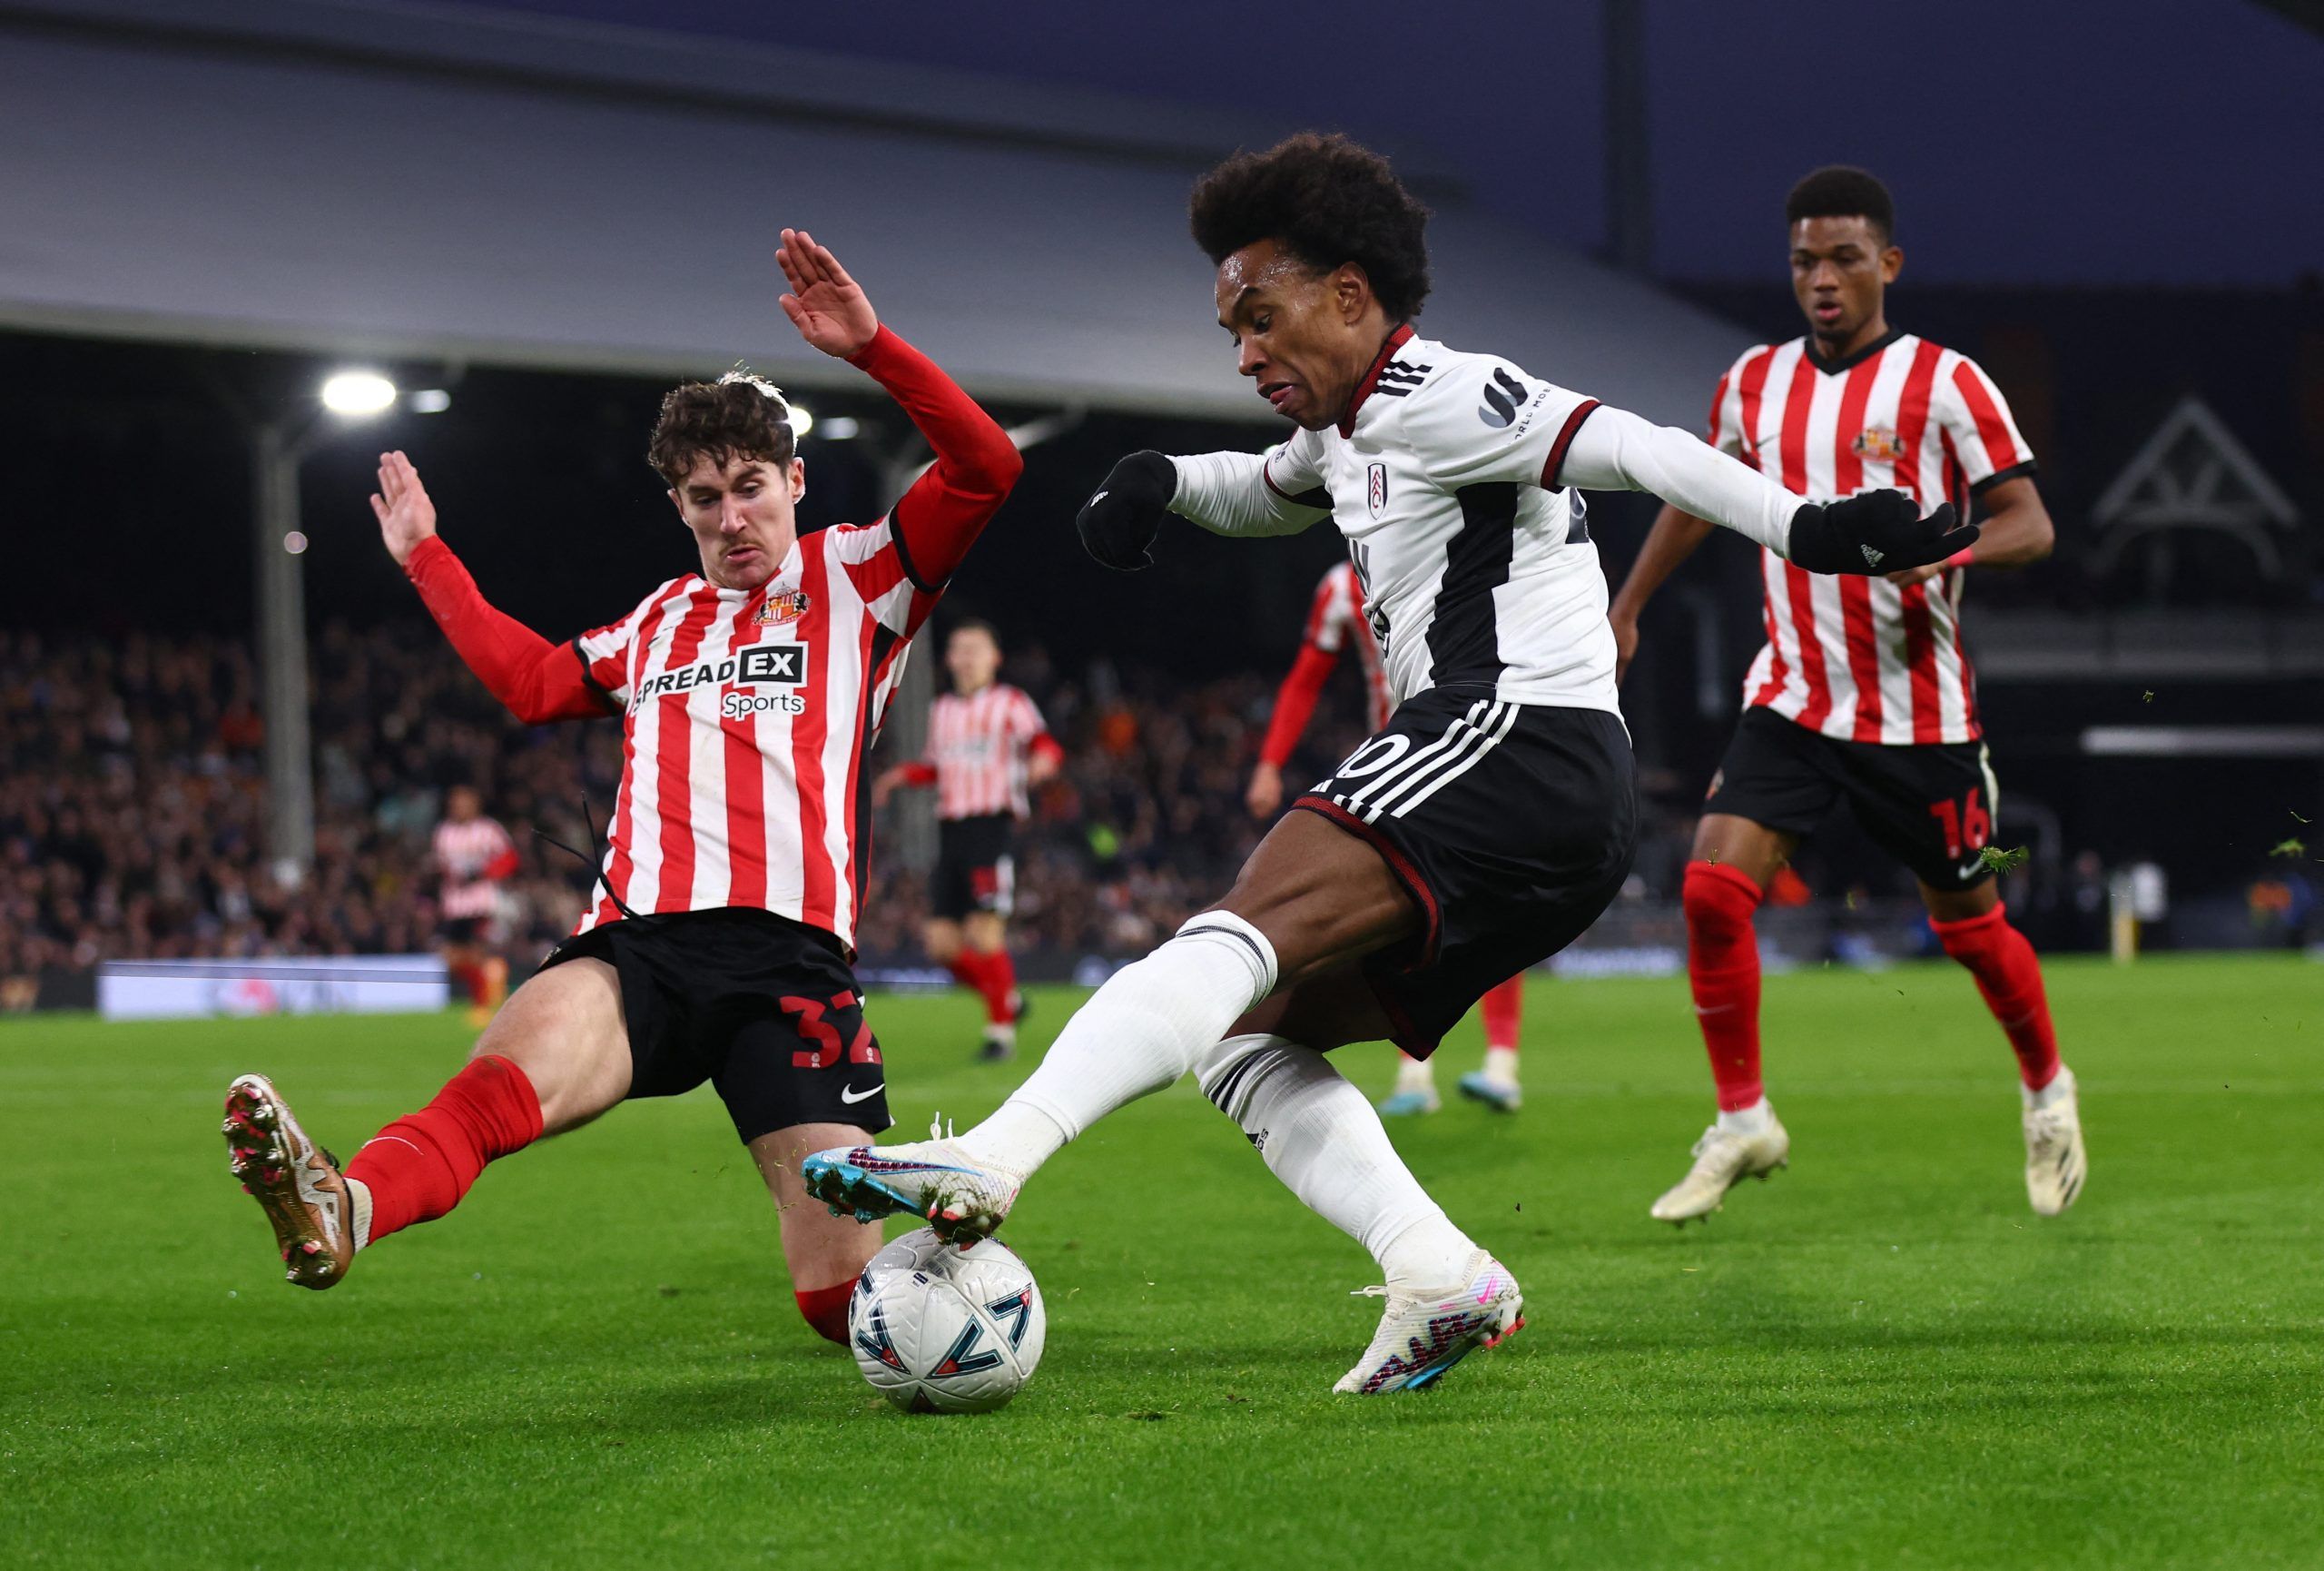 Soccer Football - FA Cup - Fourth Round - Fulham v Sunderland - Craven Cottage, London, Britain - January 28, 2023 Fulham's Willian in action with Sunderland's Trai Hume REUTERS/David Klein